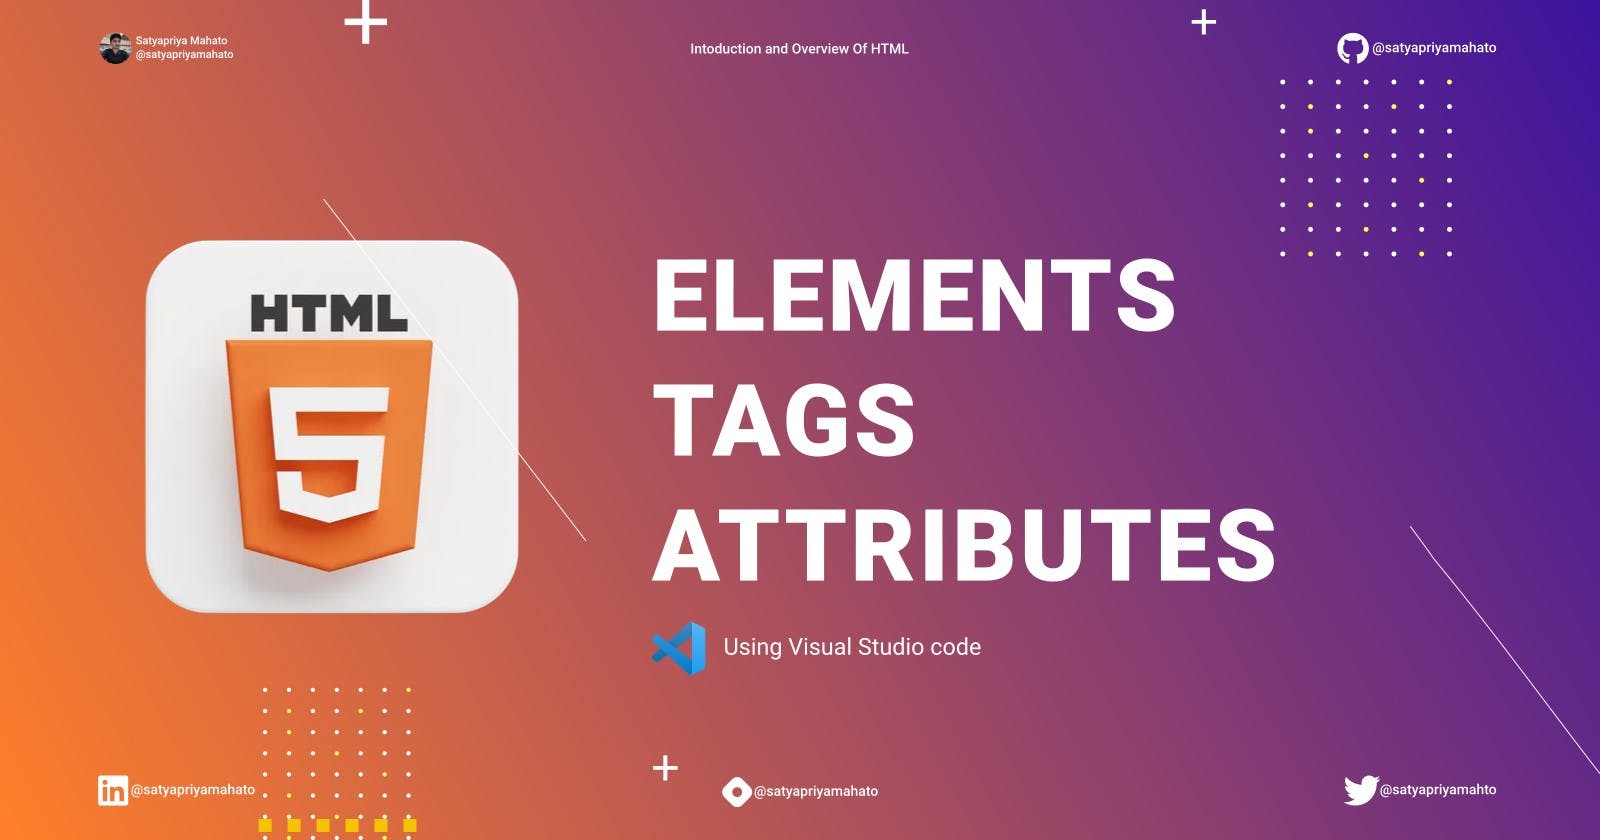 HTML elements, Tags, and Attributes.